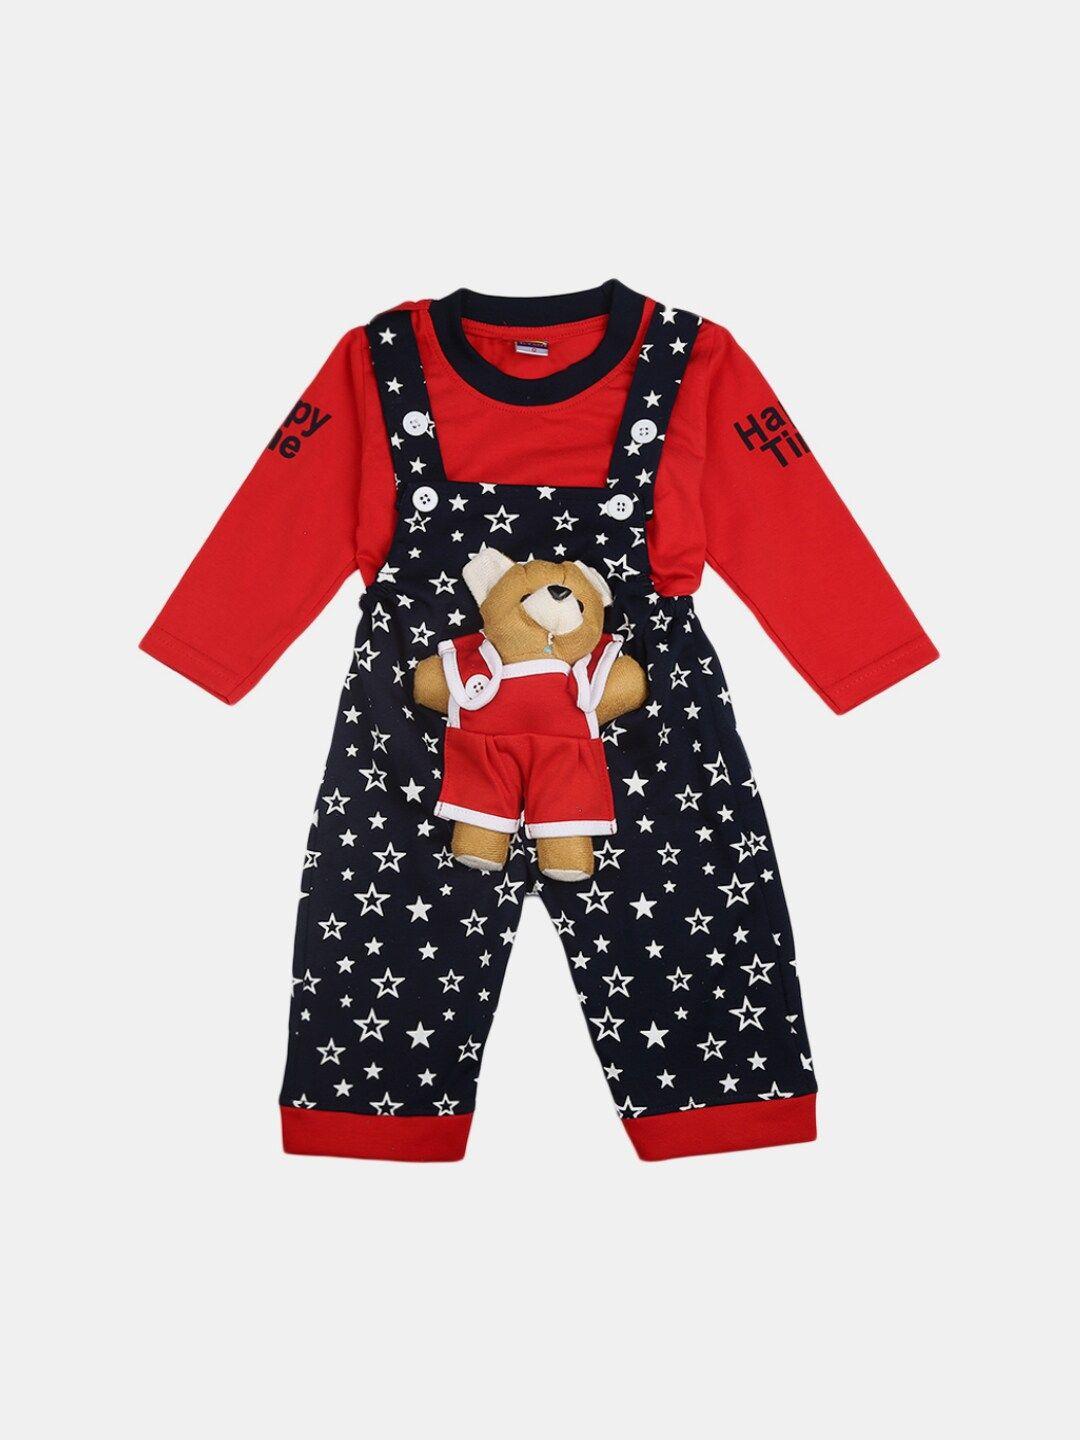 v-mart kids navy blue & red printed cotton t-shirt with dungarees